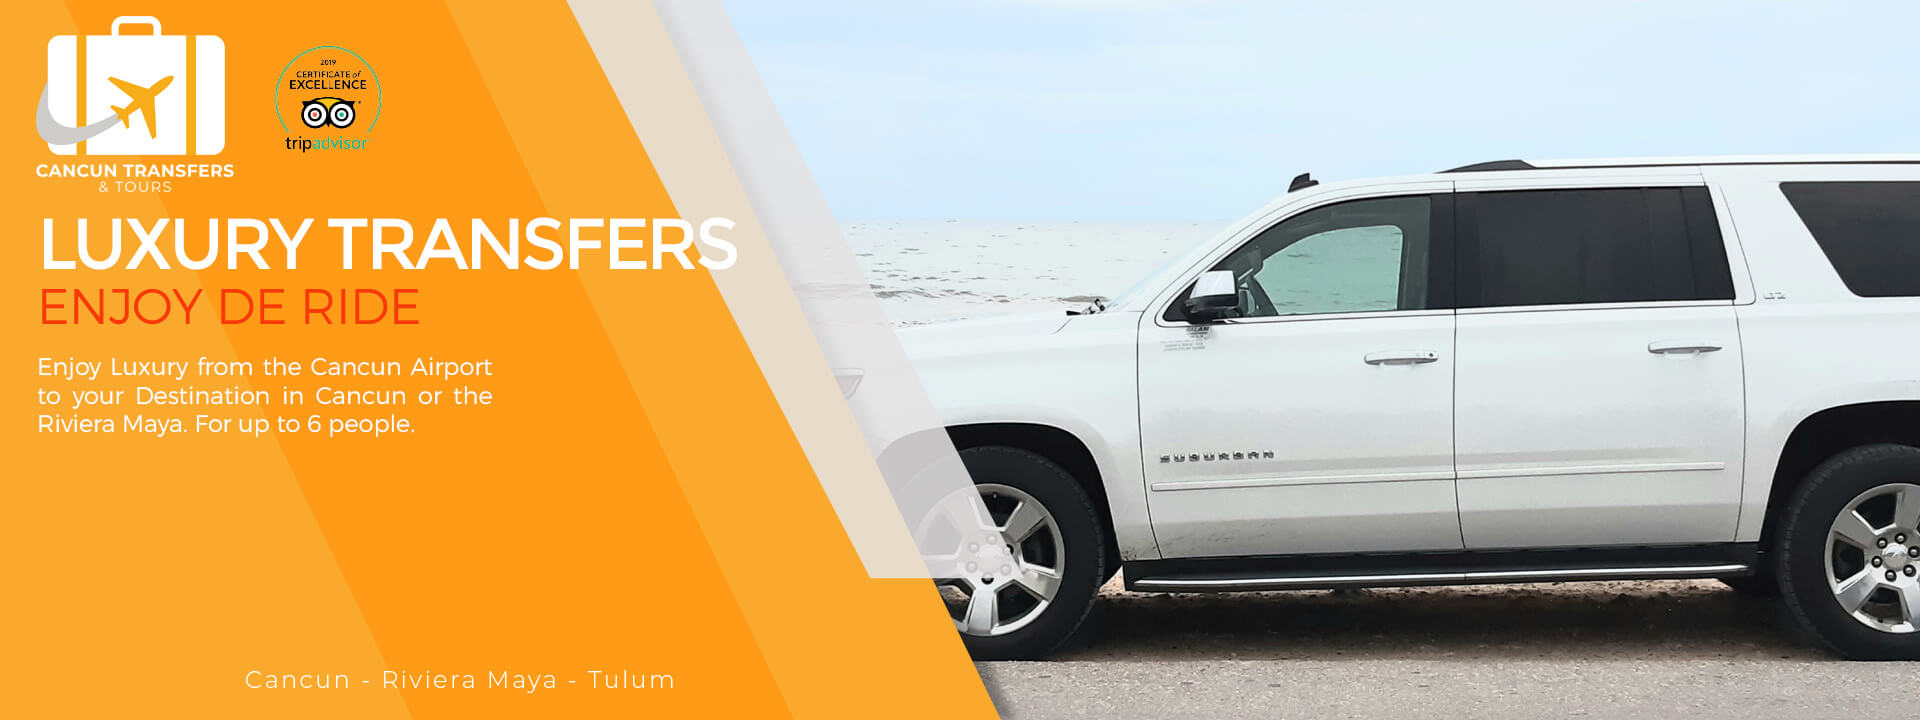 Cancun to Tulum luxury private transfer service with driver